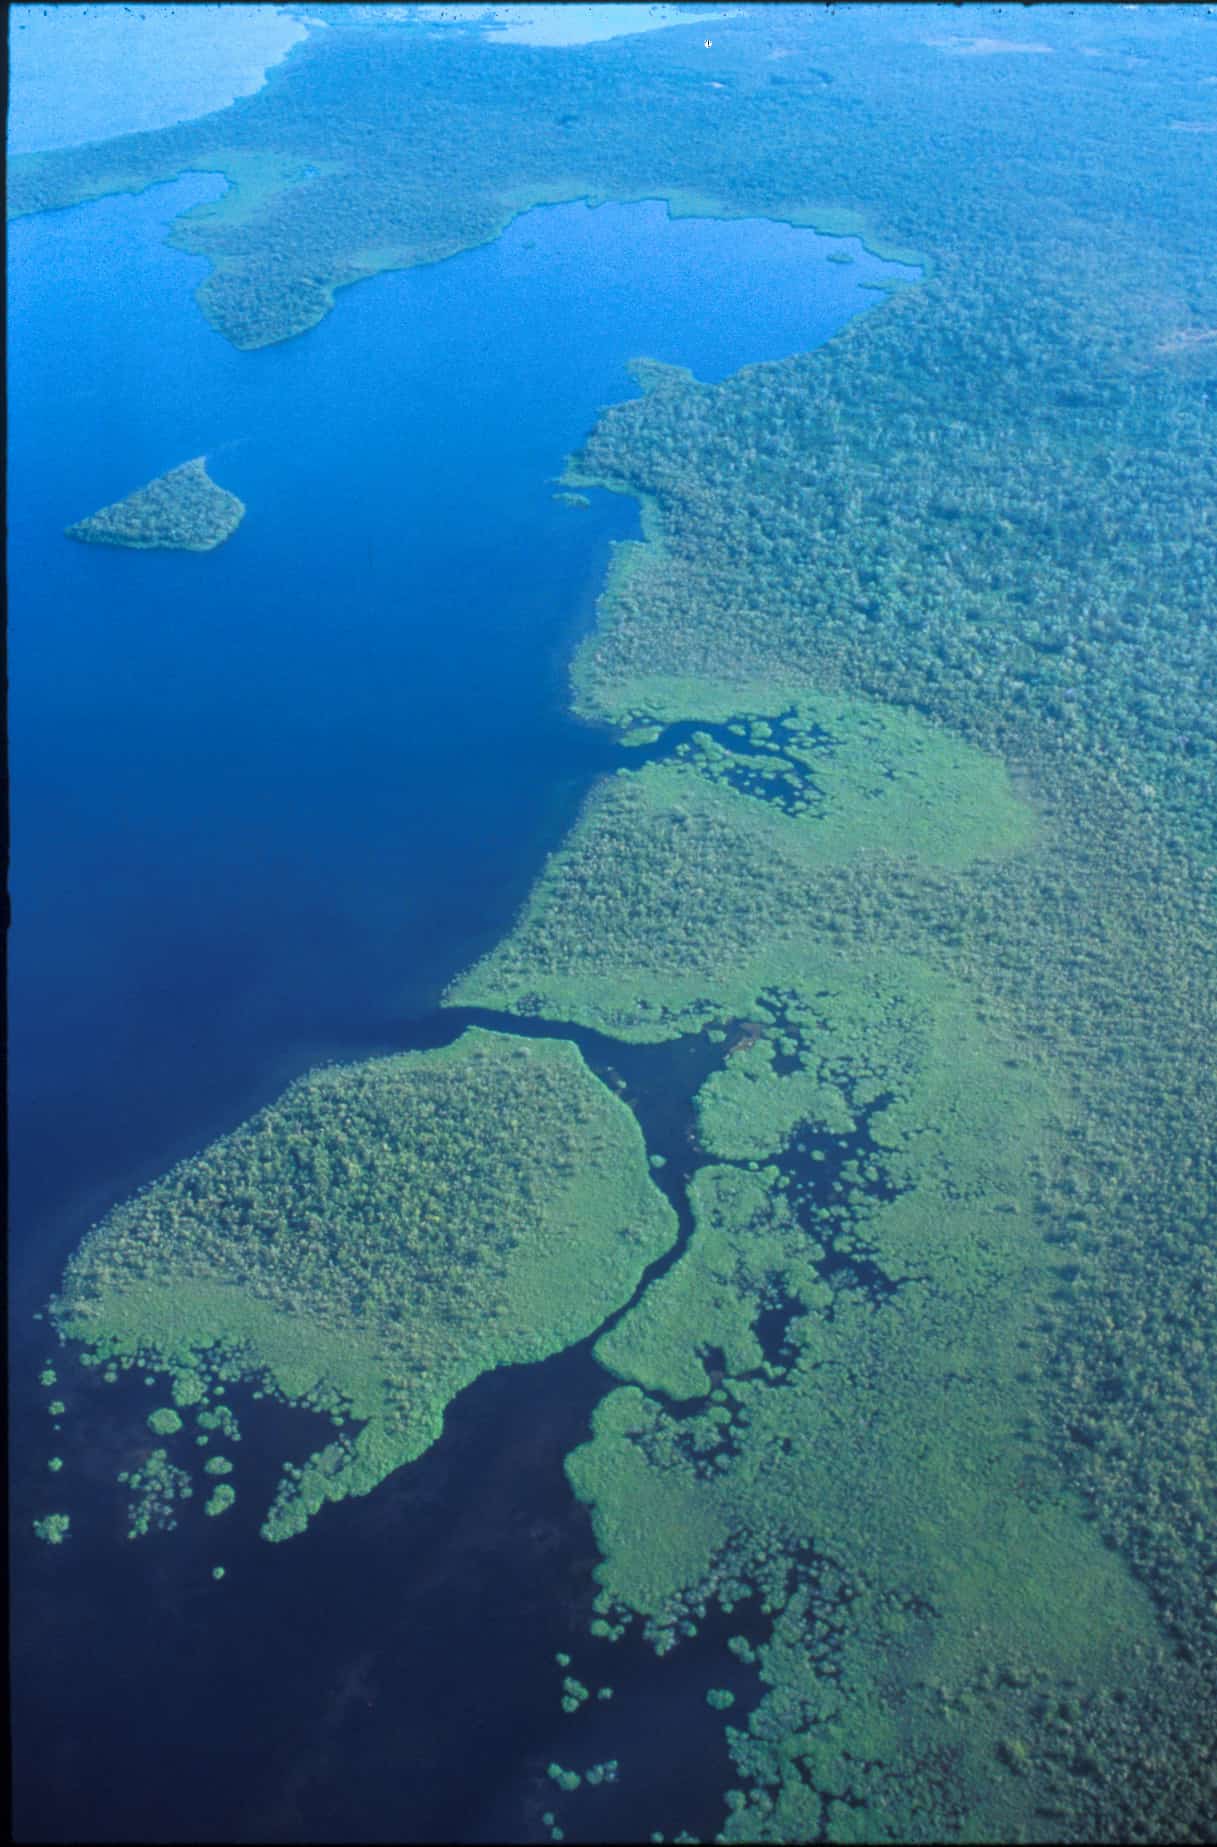 Aerial view of part of the Central Mangrove Wetland, Grand Cayman. This area, a proposed Wetland of International Importance under the Ramsar Convention, has long been proposed for effective protection, but the need is still there